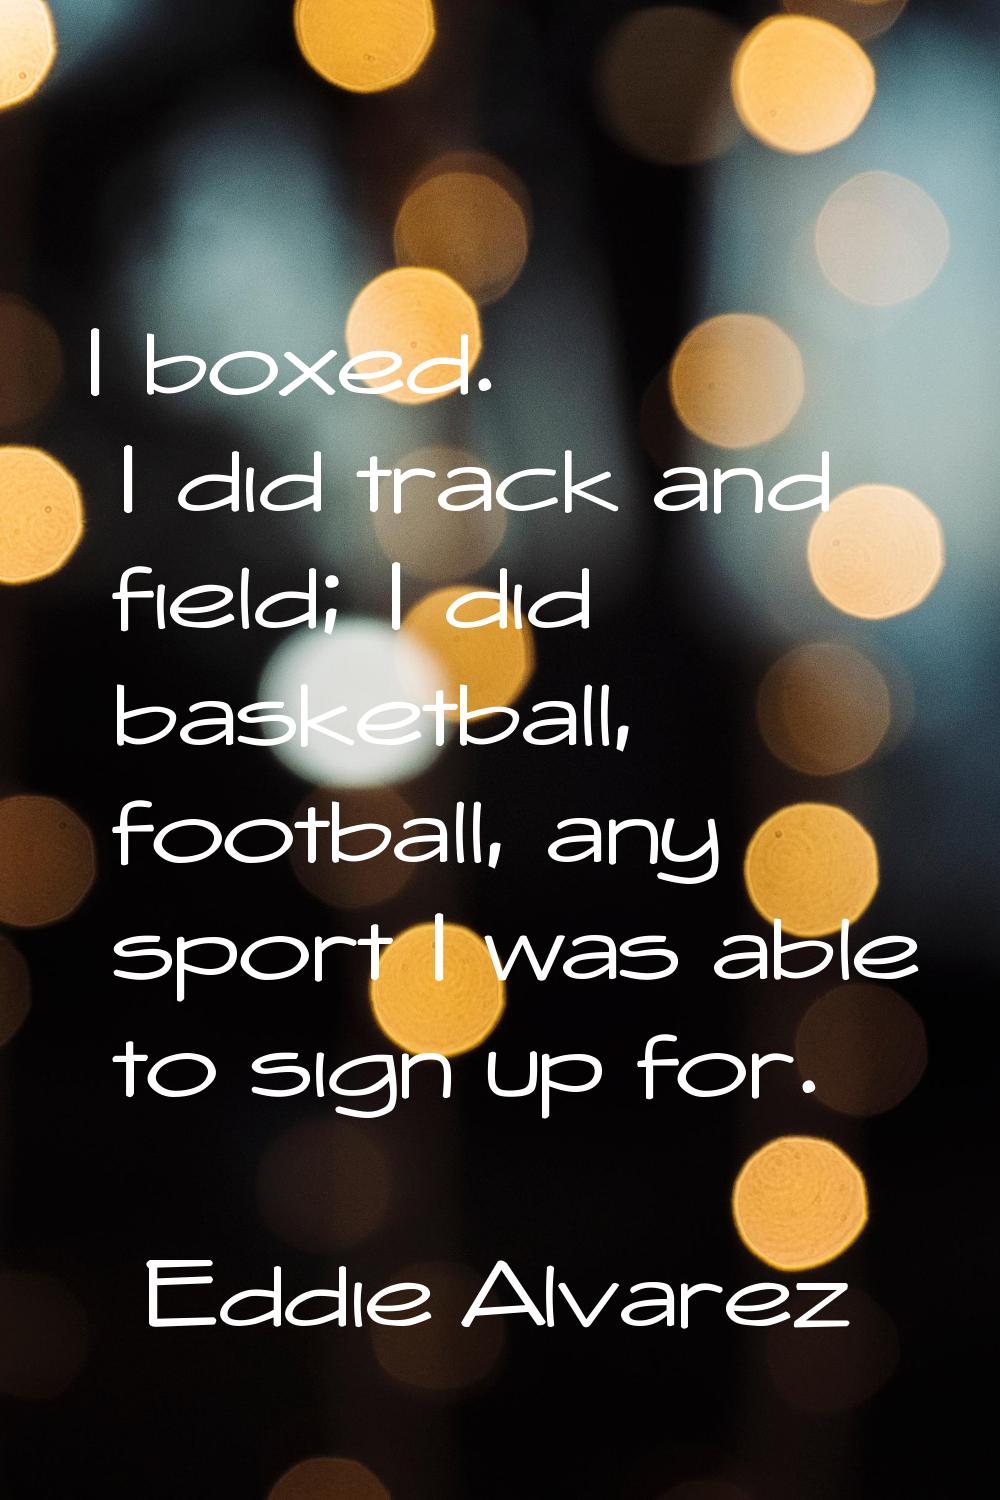 I boxed. I did track and field; I did basketball, football, any sport I was able to sign up for.